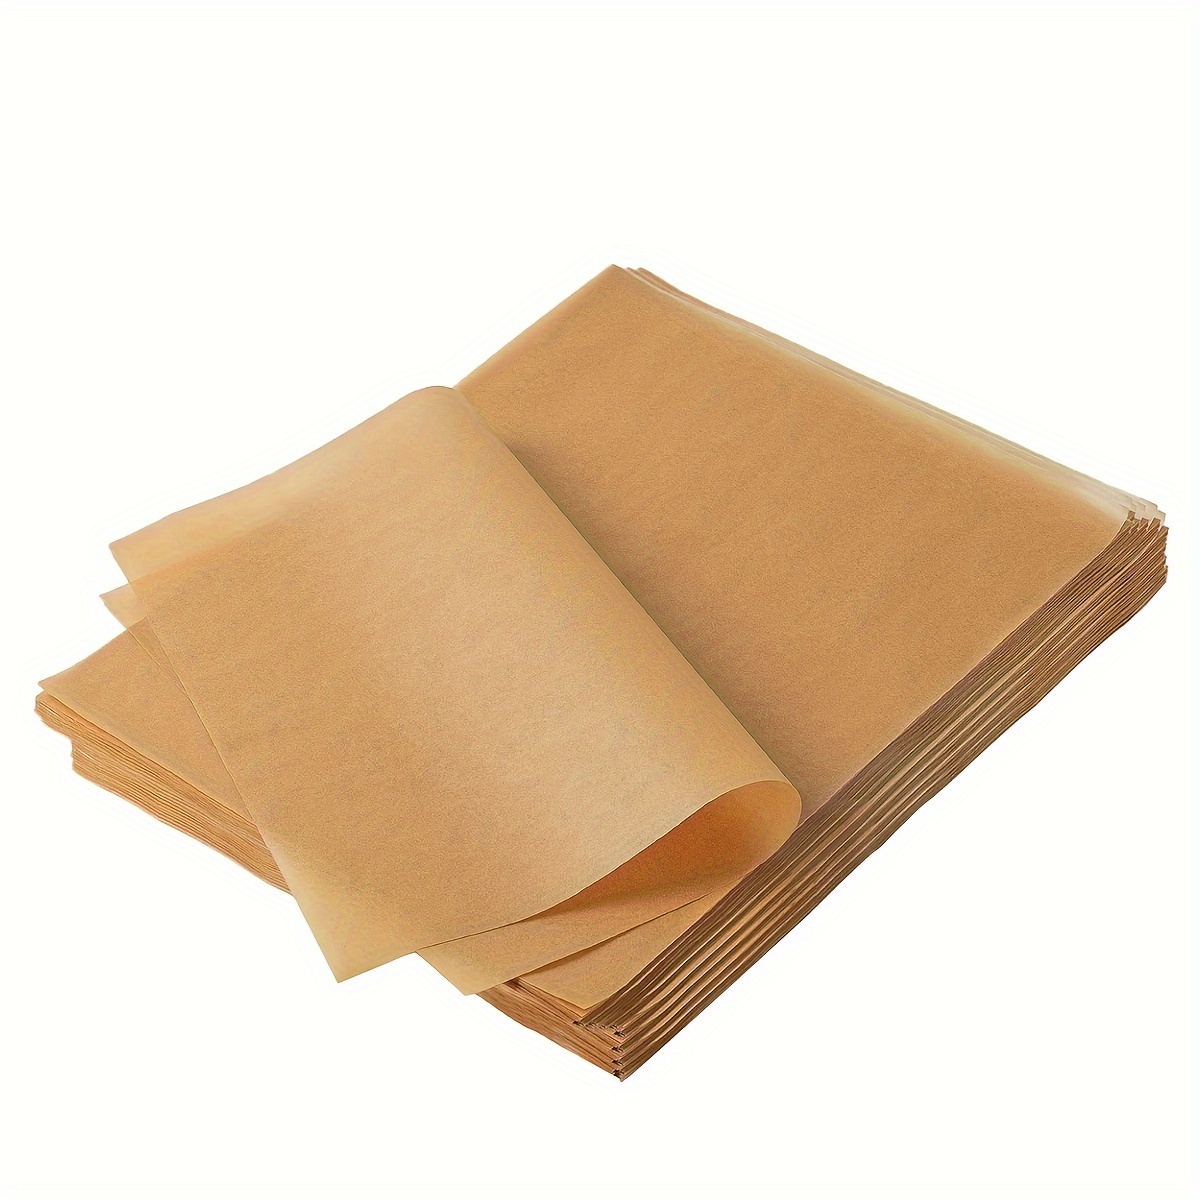 

100pcs, 12x16 Inch Parchment Paper, Heavy Duty Baking Paper, Unbleached Non-stick Sheets For Air Fryer, Grilling, Steaming Cooking Bread Cake And Wrapping Foods